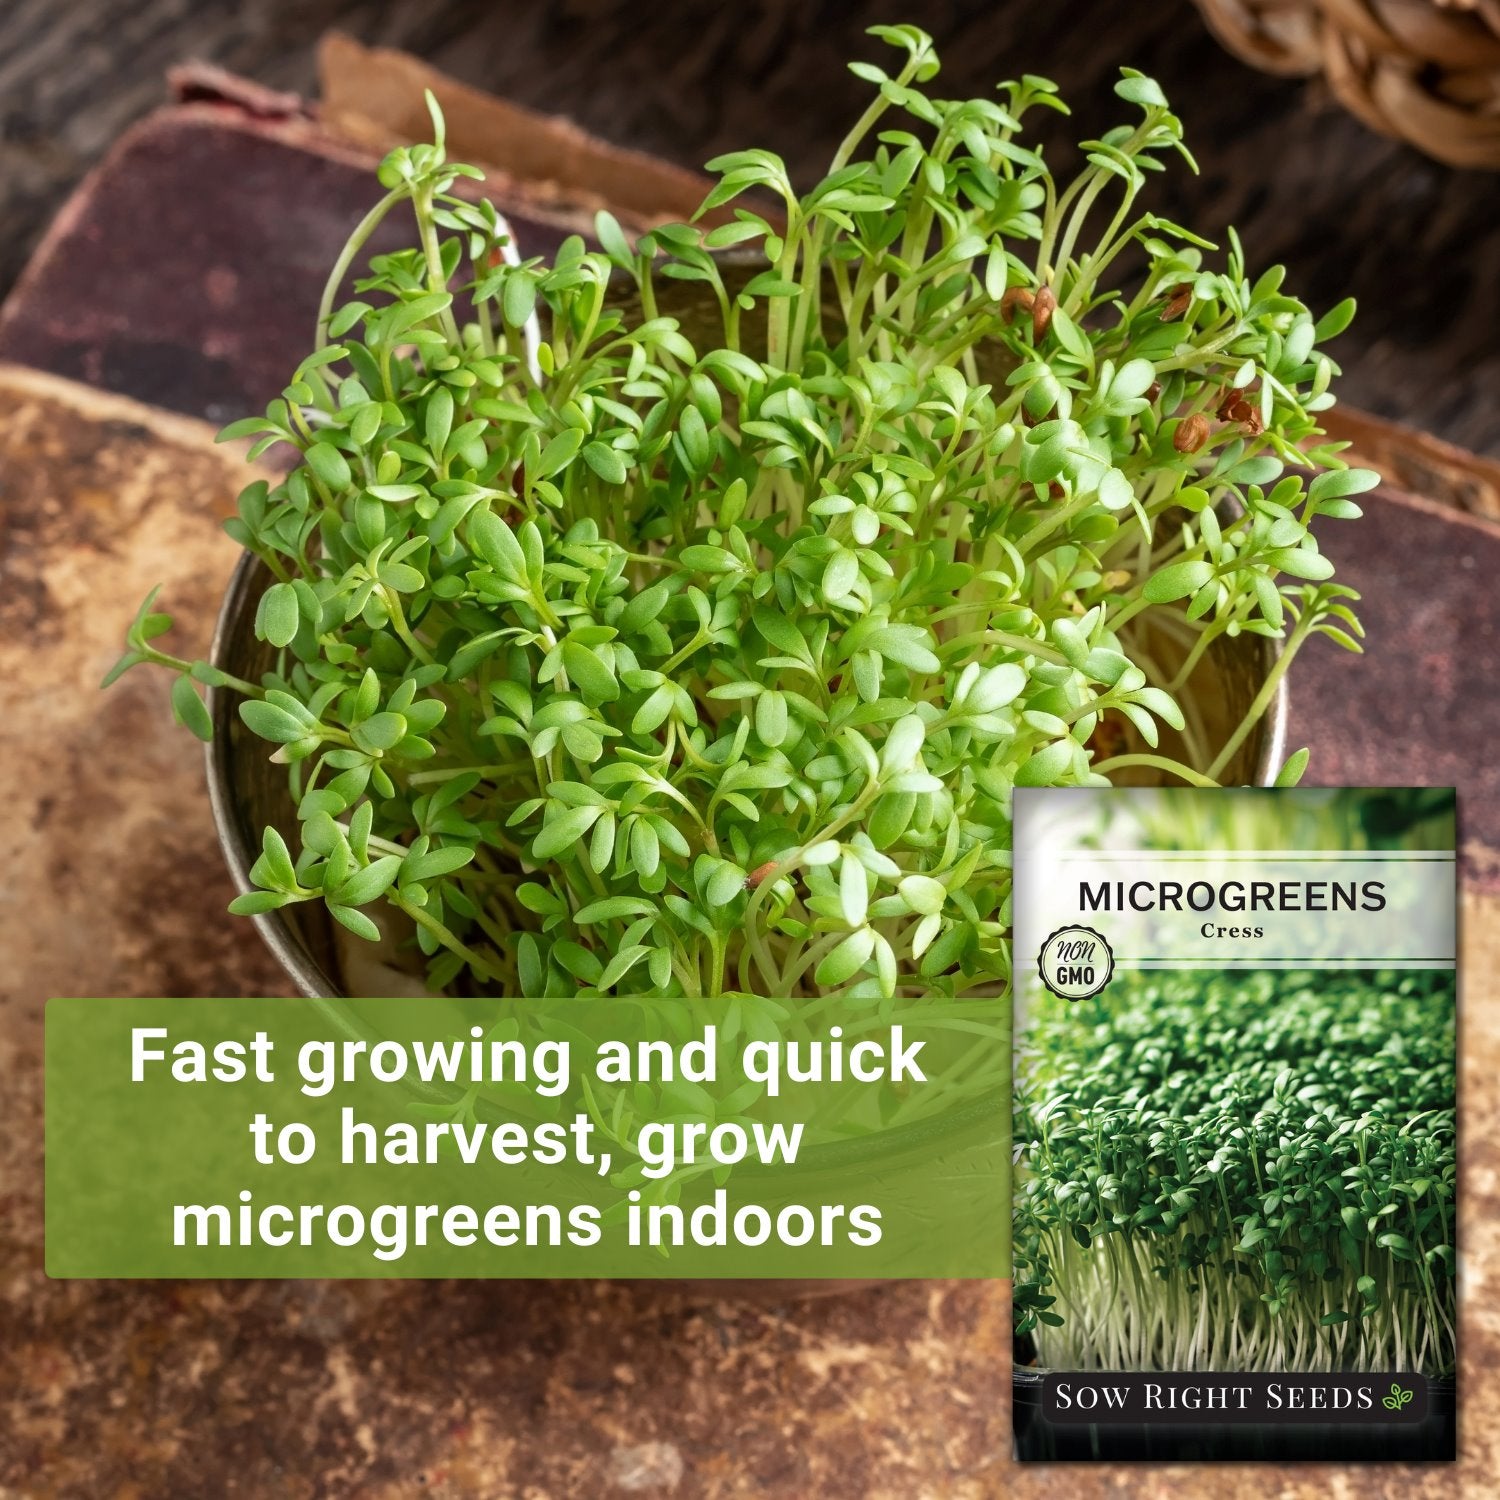 Curled Cress Seeds - Organic & Non Gmo Cress Seeds - Heirloom Seeds –  Microgreen Seeds - Grow Your Own Fresh Cress Microgreens At Home